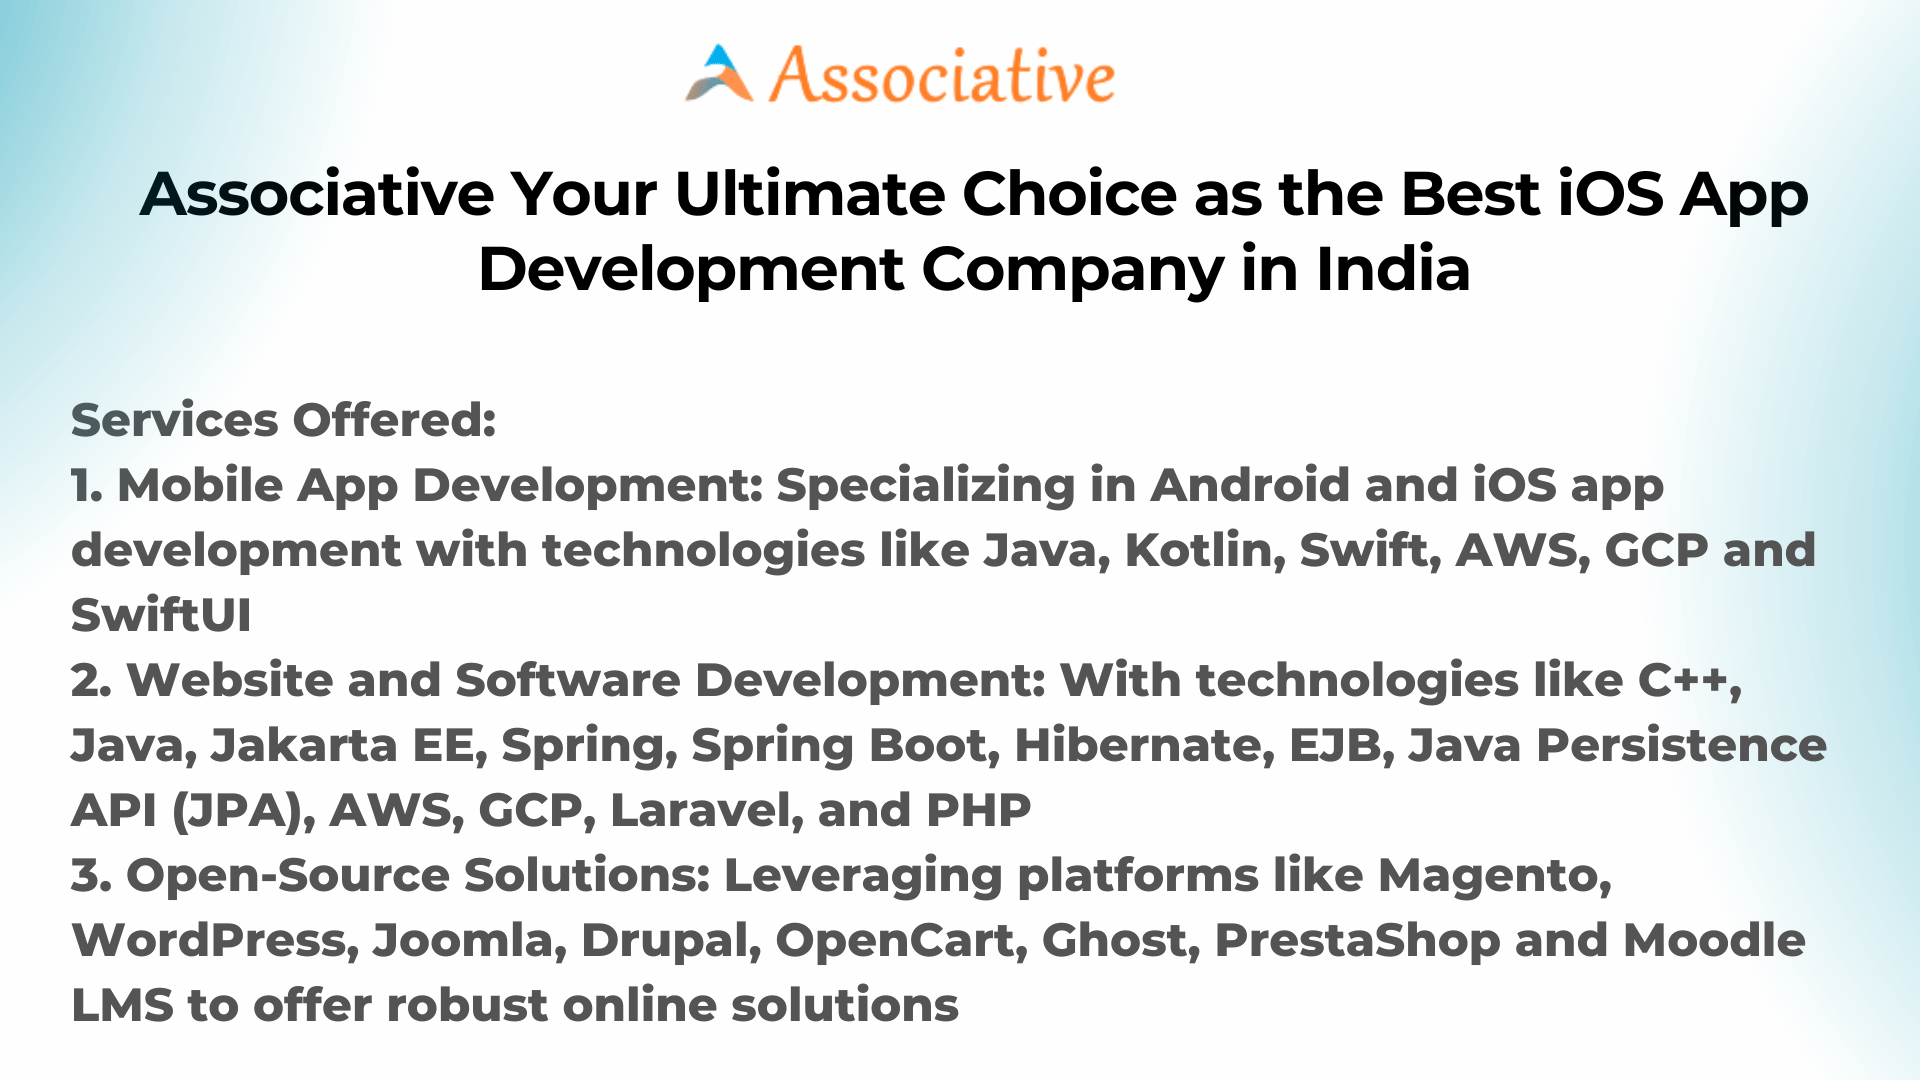 Associative Your Ultimate Choice as the Best iOS App Development Company in India